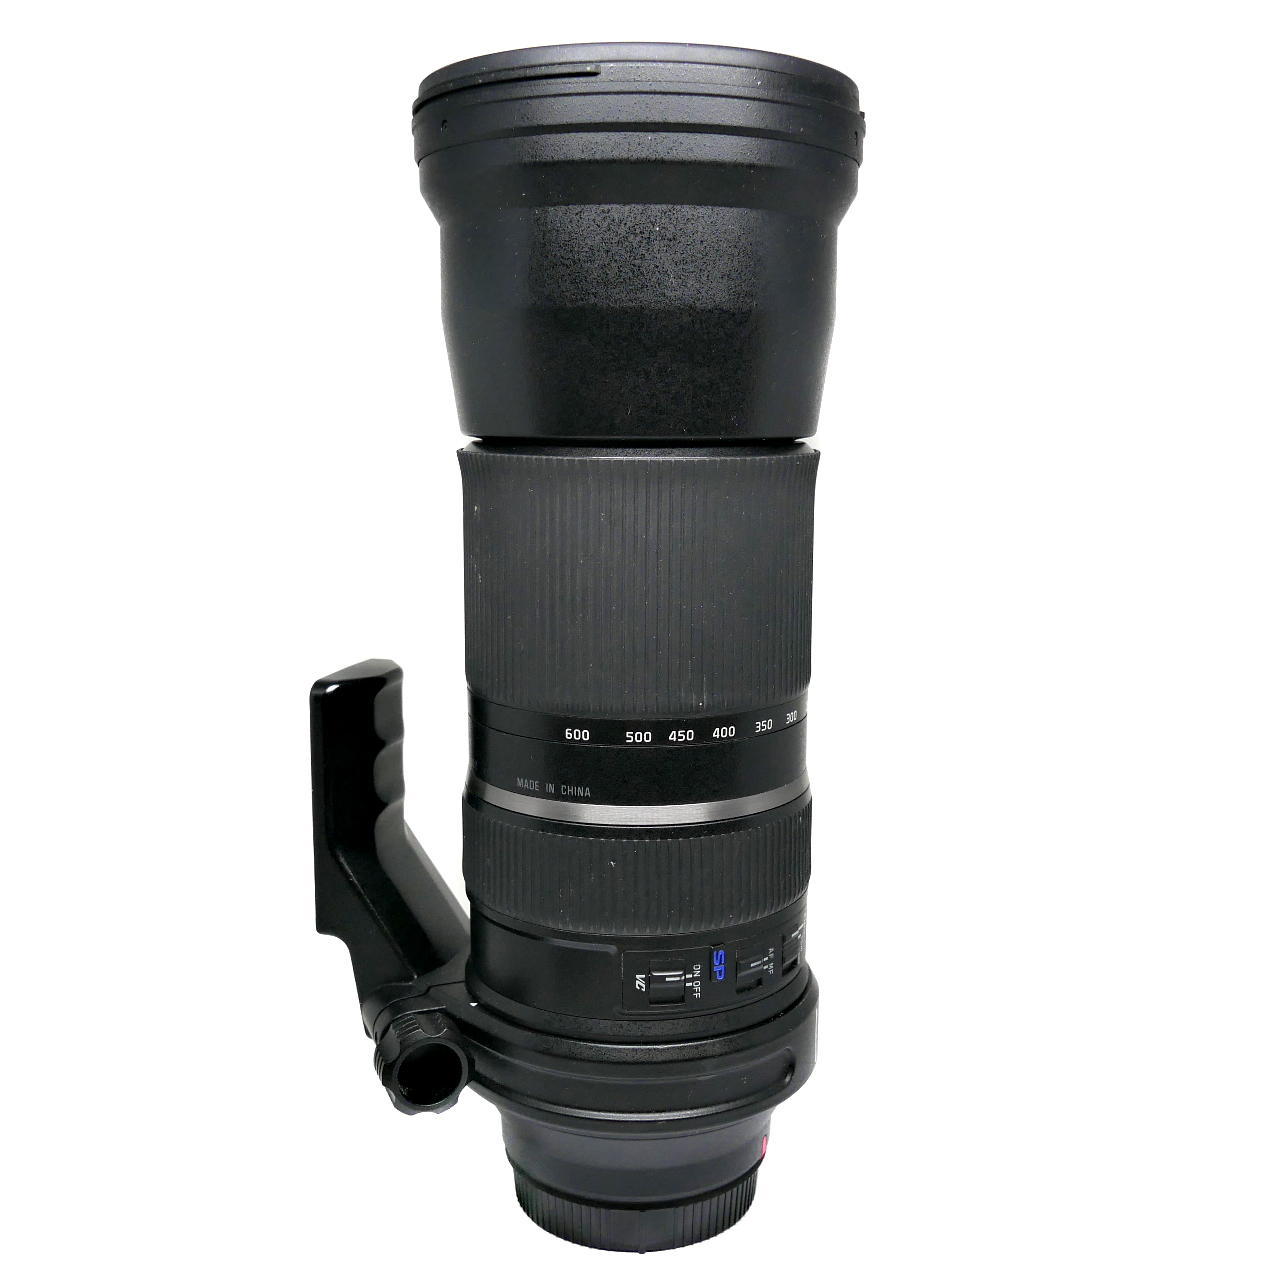 (Myyty) Tamron SP 150-600mm f/5-6.3 Di VC USD (Canon) (käytetty) 